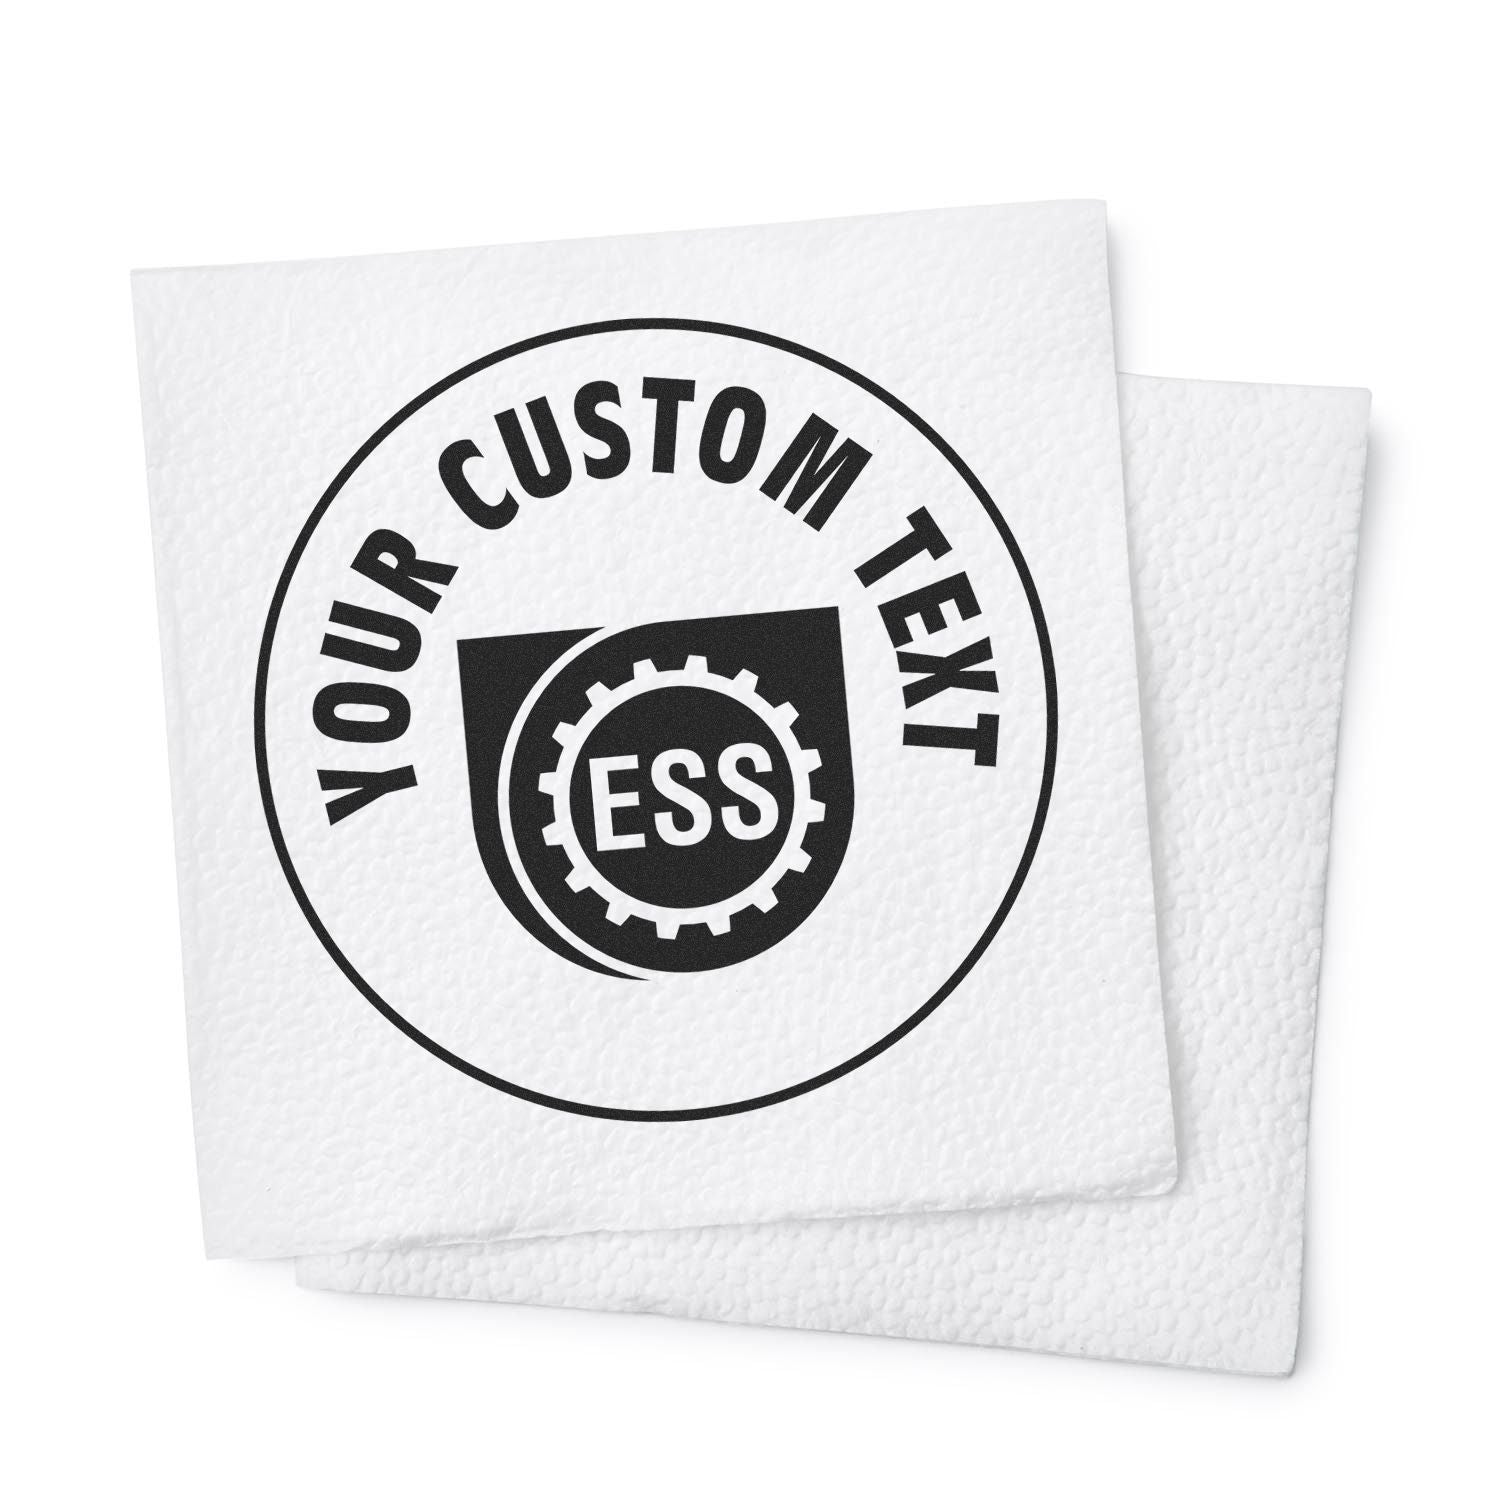 Masterful Impressions: The Art of Custom Business Stamps Feature Image